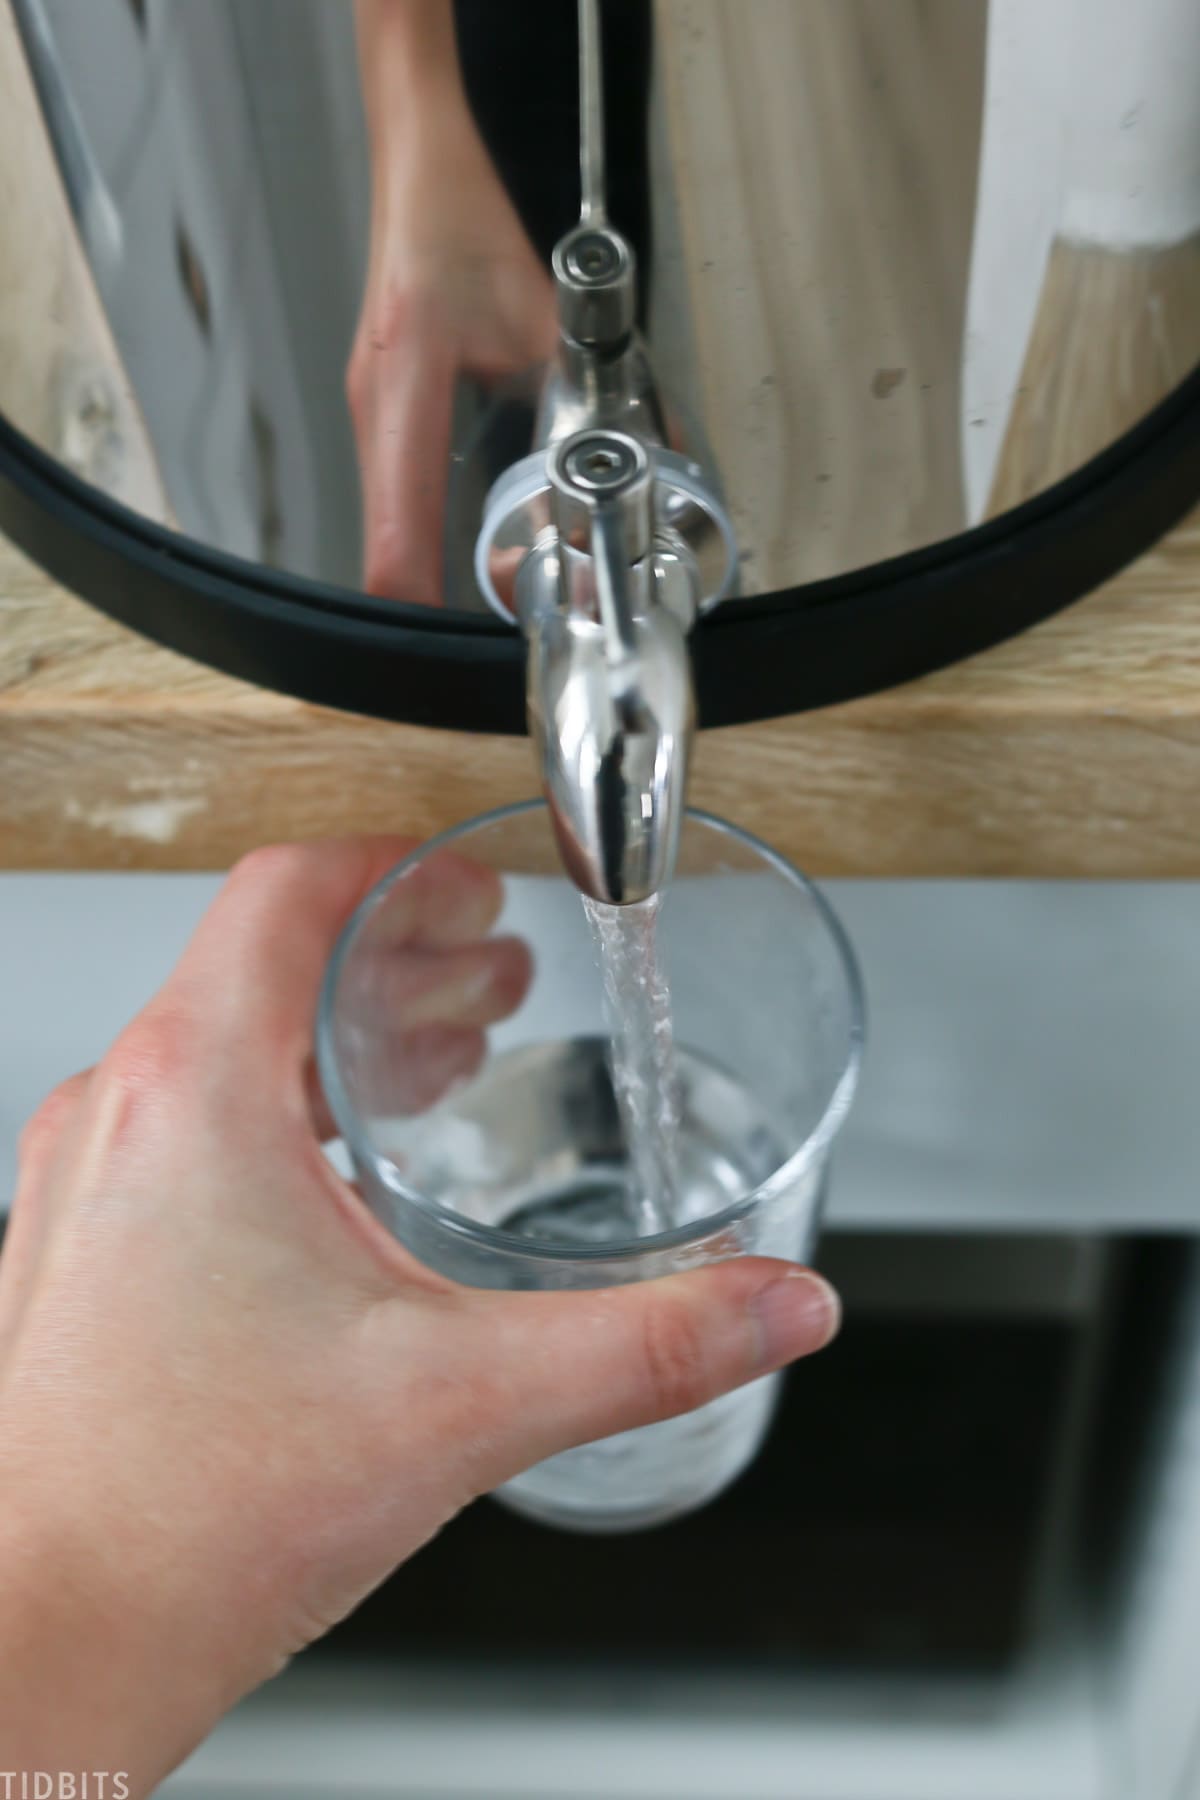 water being poured in glass